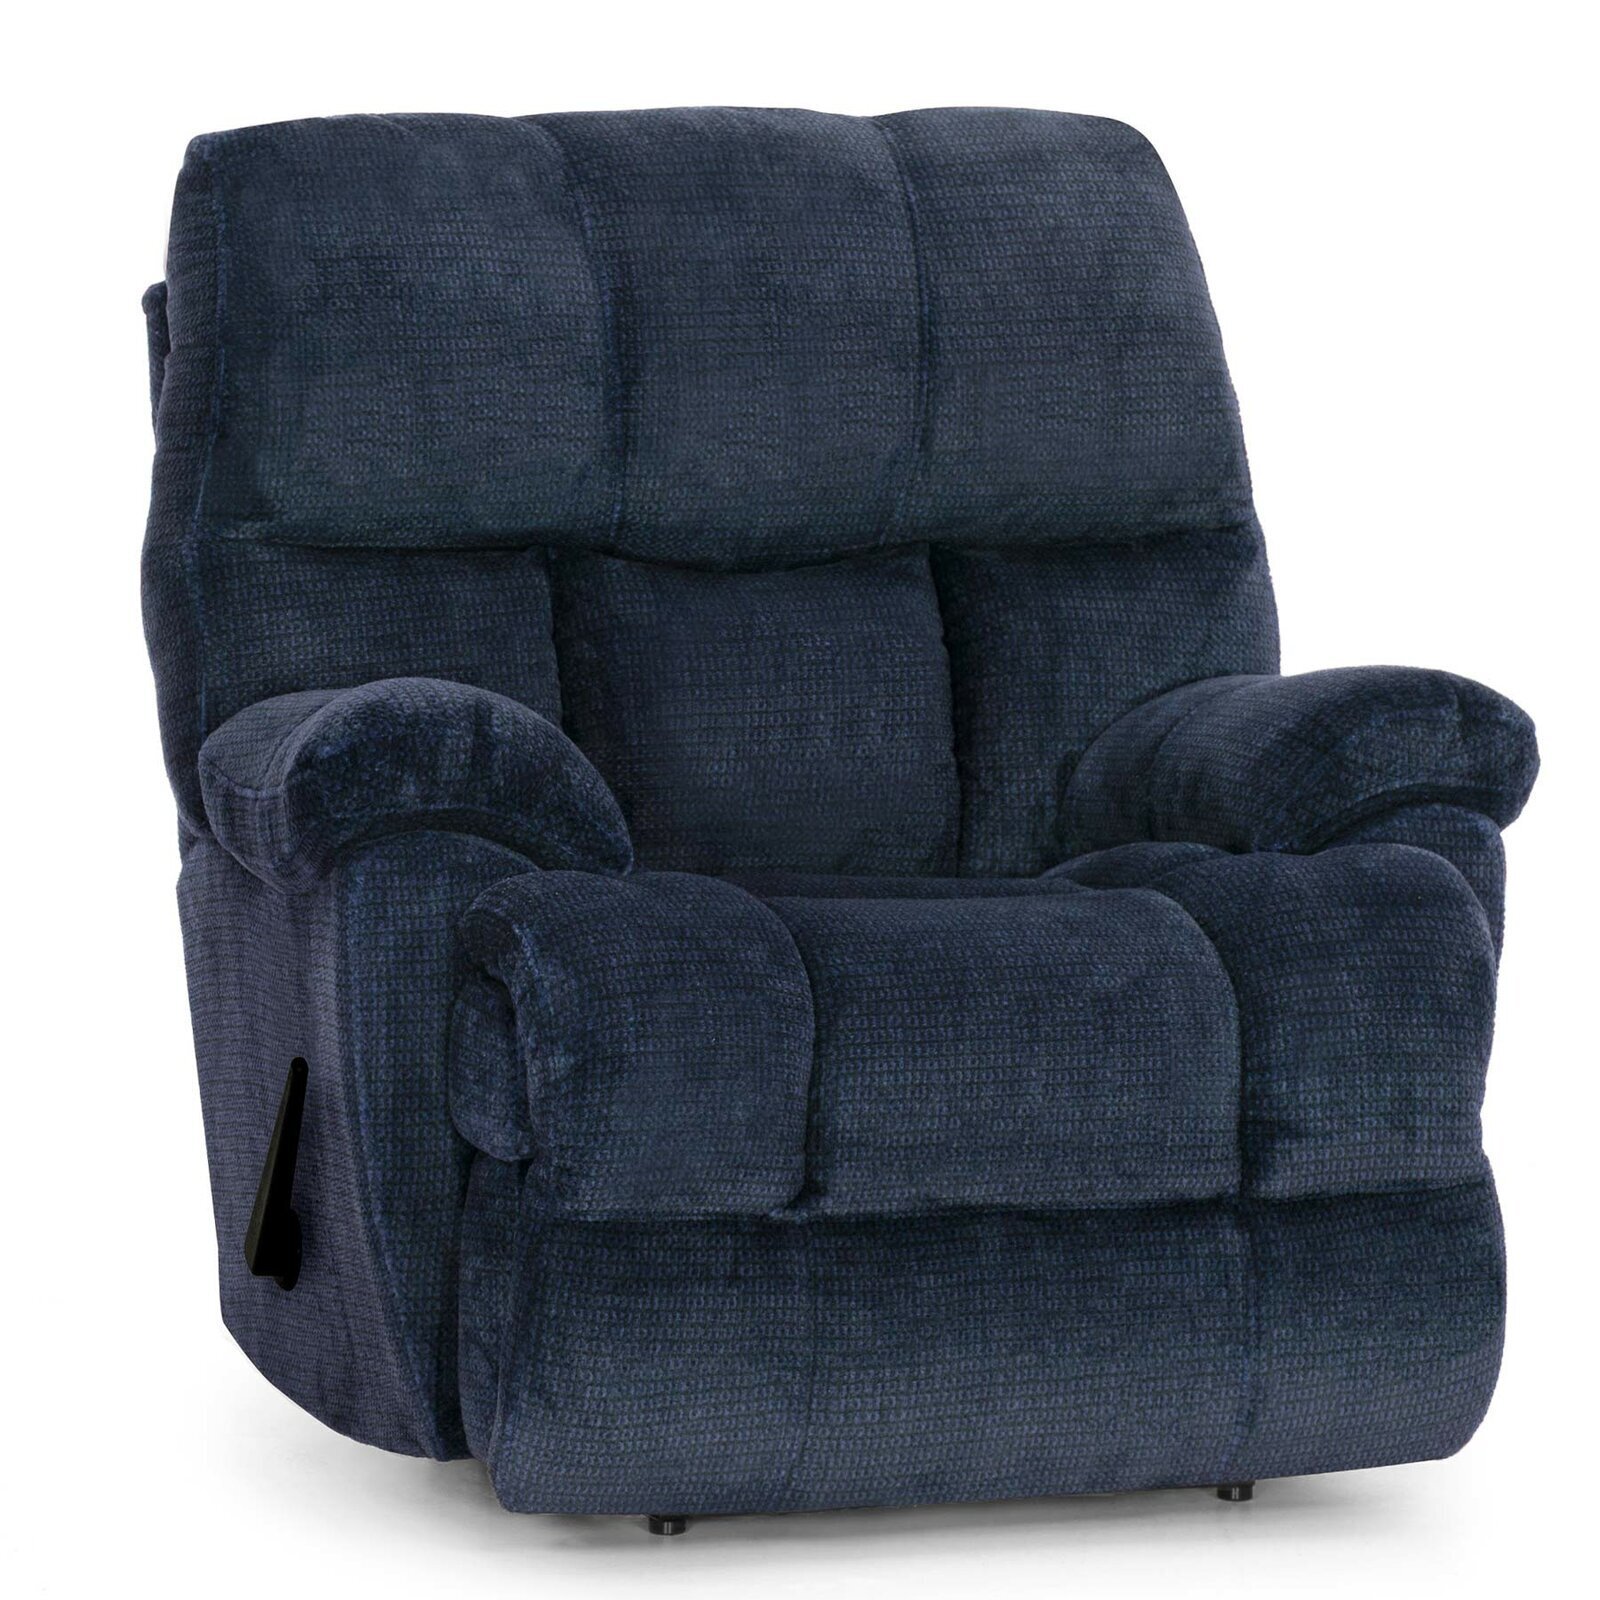 45” Wide Manual Chair and a Half Rocker Recliner